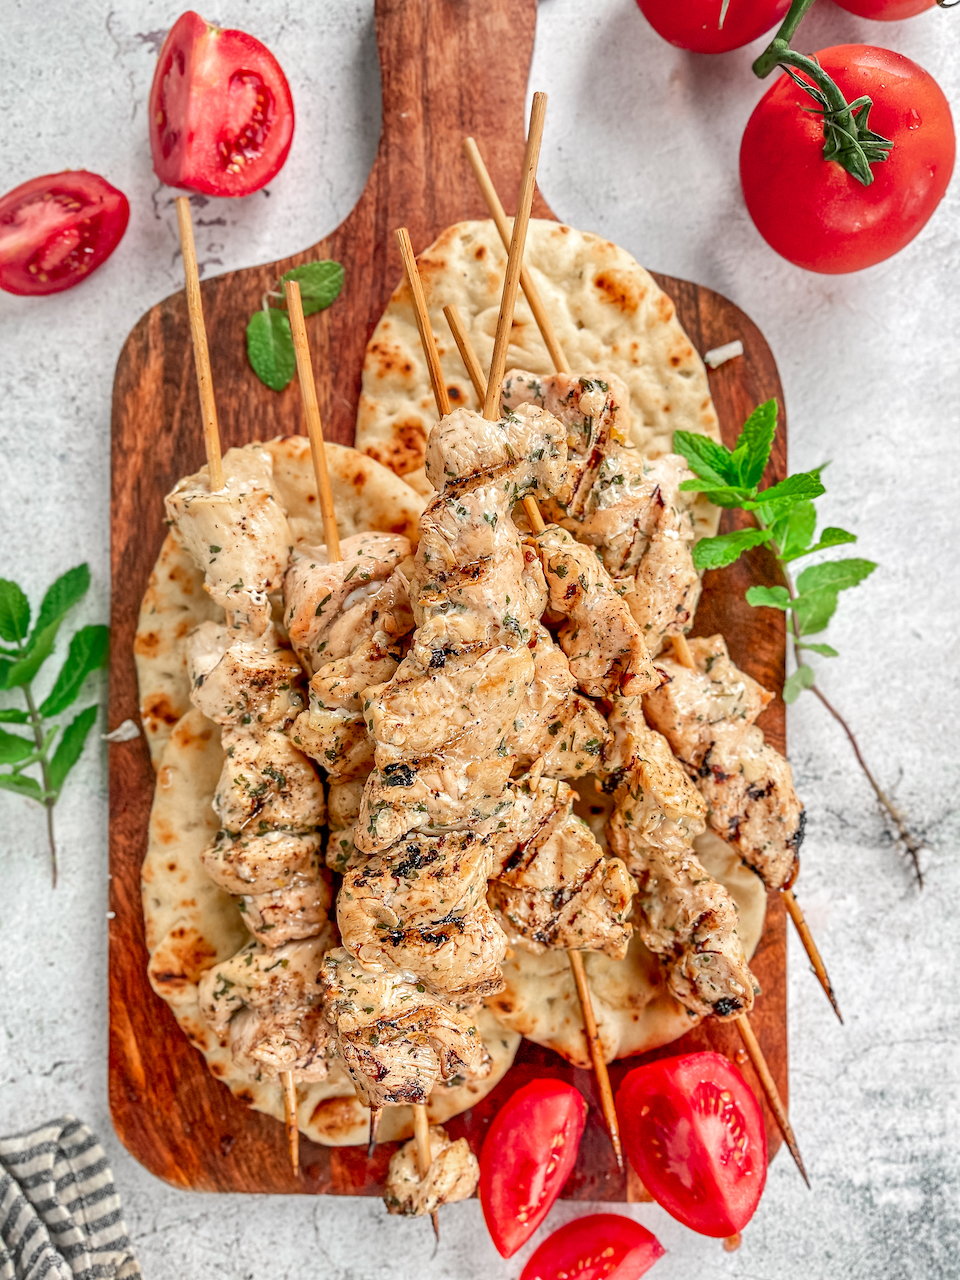 Chicken Skewers with Naan and tomatoes